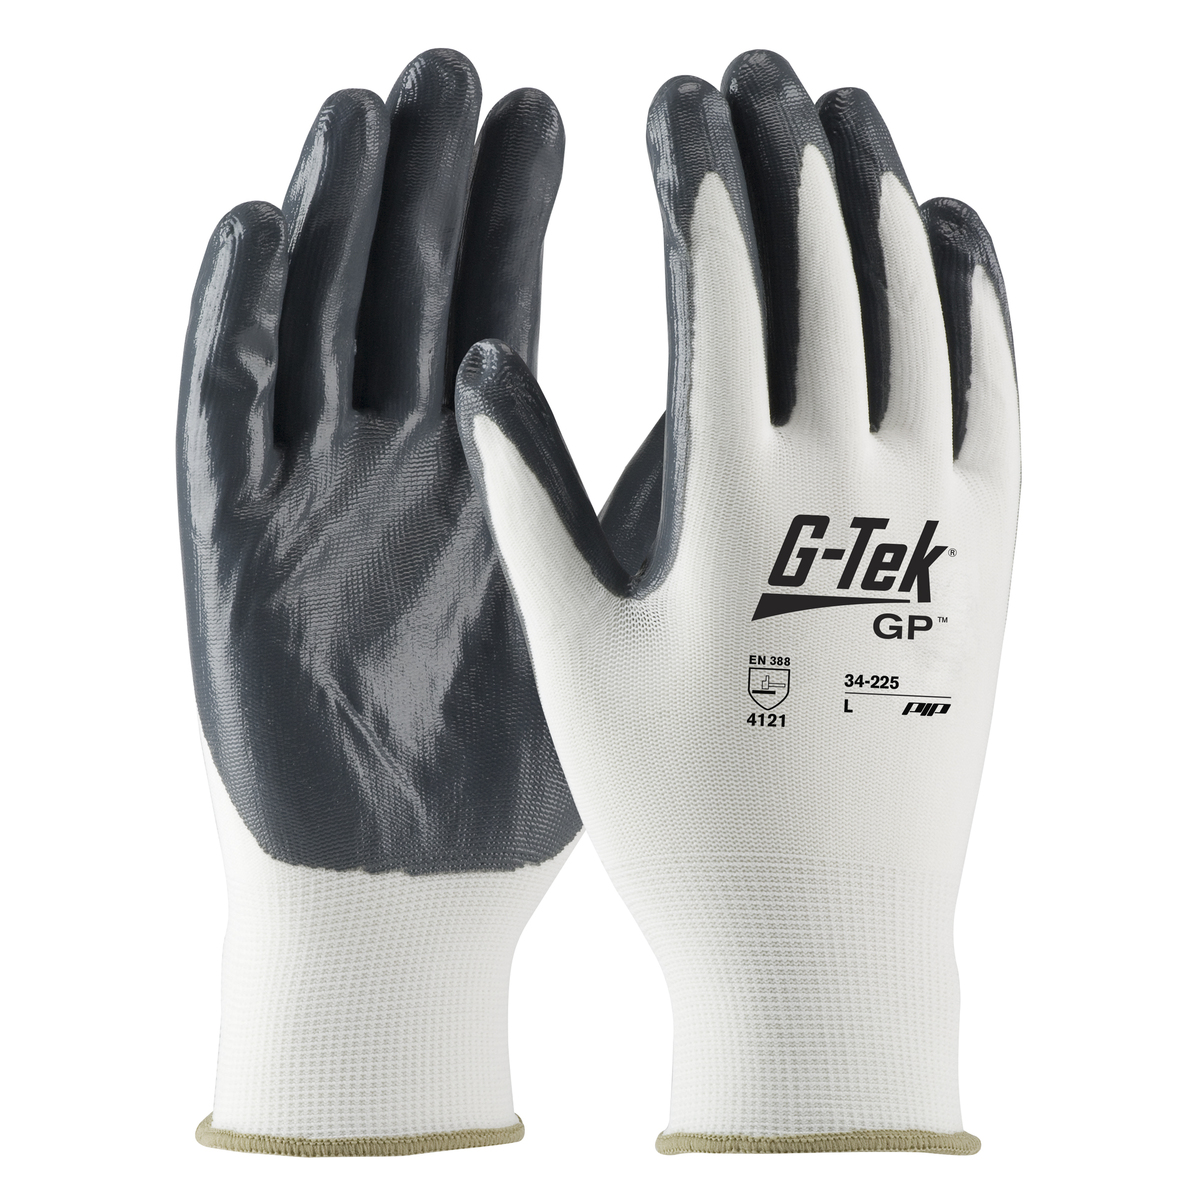 PIP® Large G-Tek® 13 Gauge Gray Nitrile Palm And Finger Coated Work Gloves With Nylon Liner And Continuous Knit Wrist